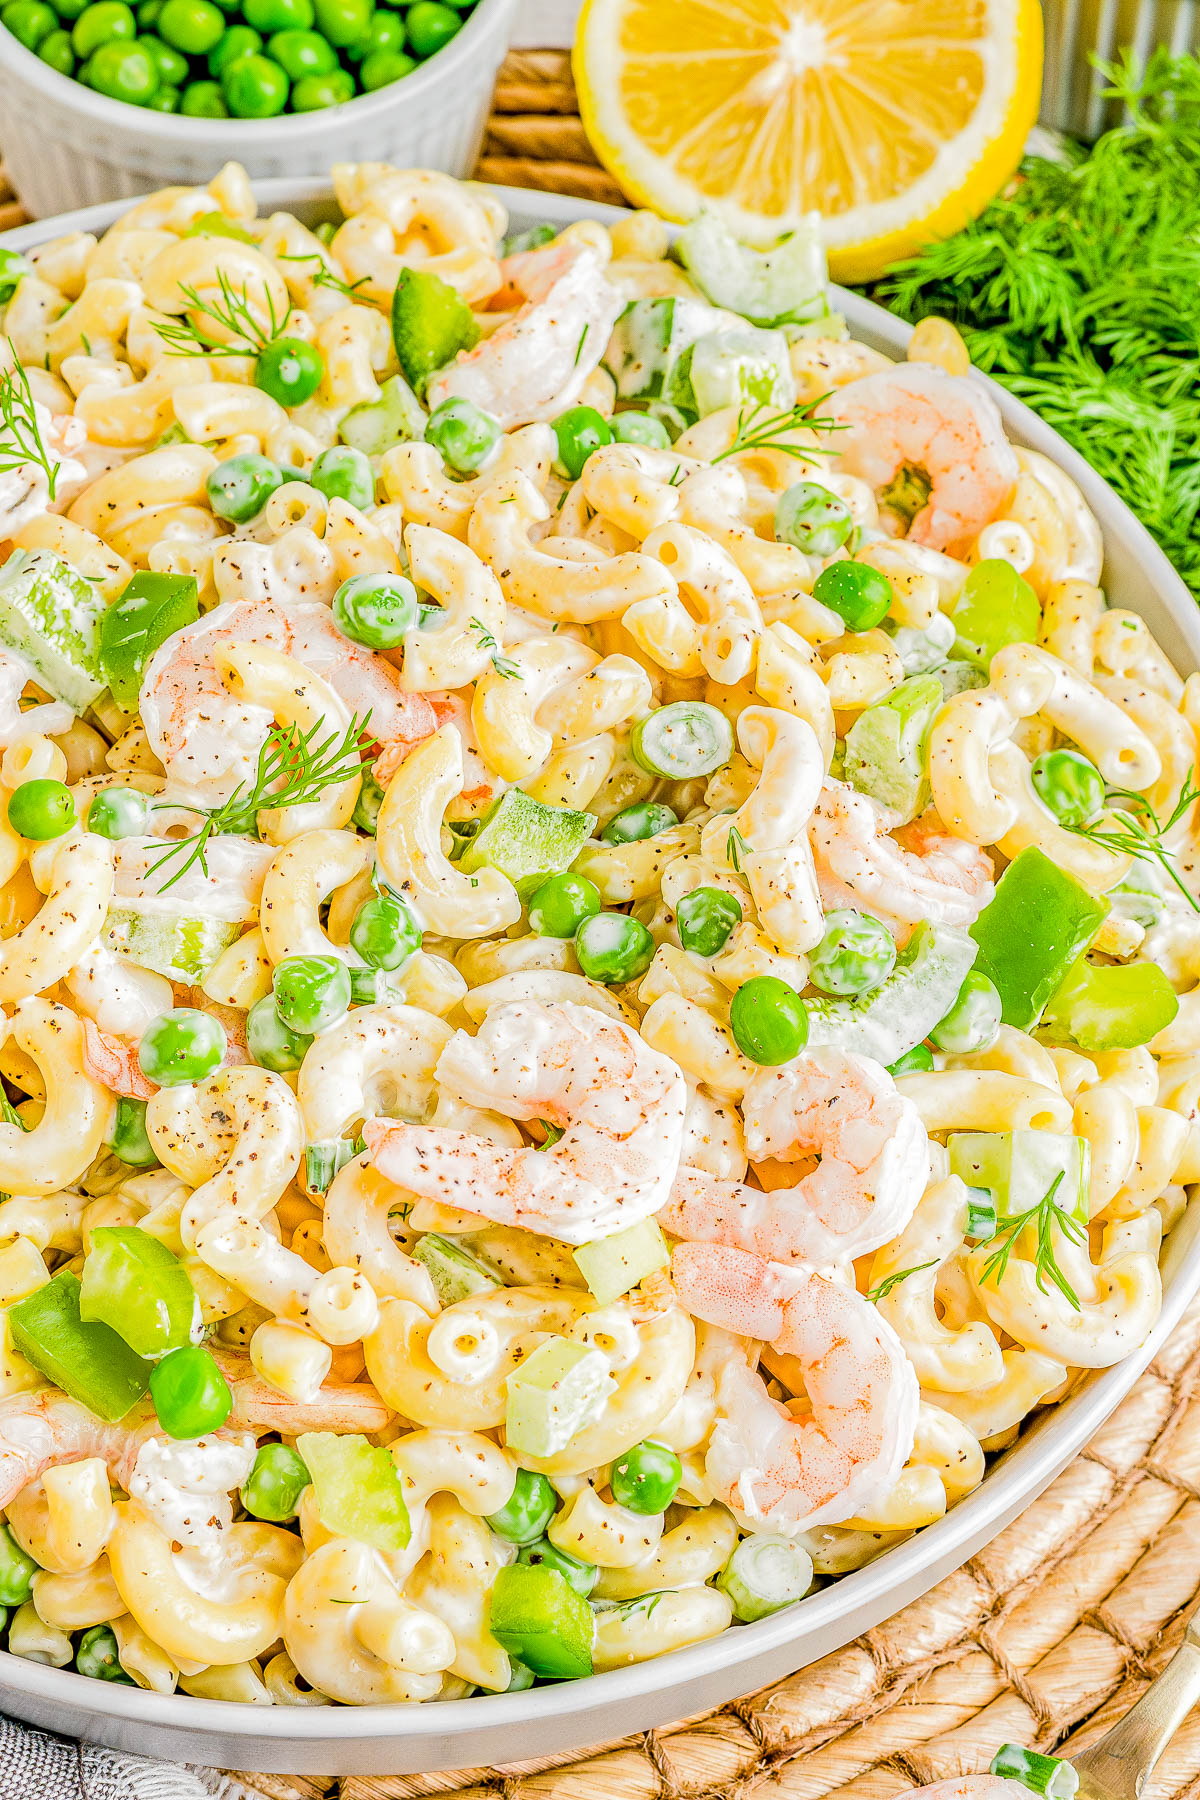 Shrimp Pasta Salad - 🍤🫛🌿 Tender pasta, juicy shrimp, crunchy celery, bell peppers, and peas are tossed in a creamy and tangy homemade dressing for zesty perfection! Great for summer gatherings to serve as a side salad or make it for a lighter yet satisfying stand alone meal for lunch or dinner! Very EASY and always a crowd FAVORITE!